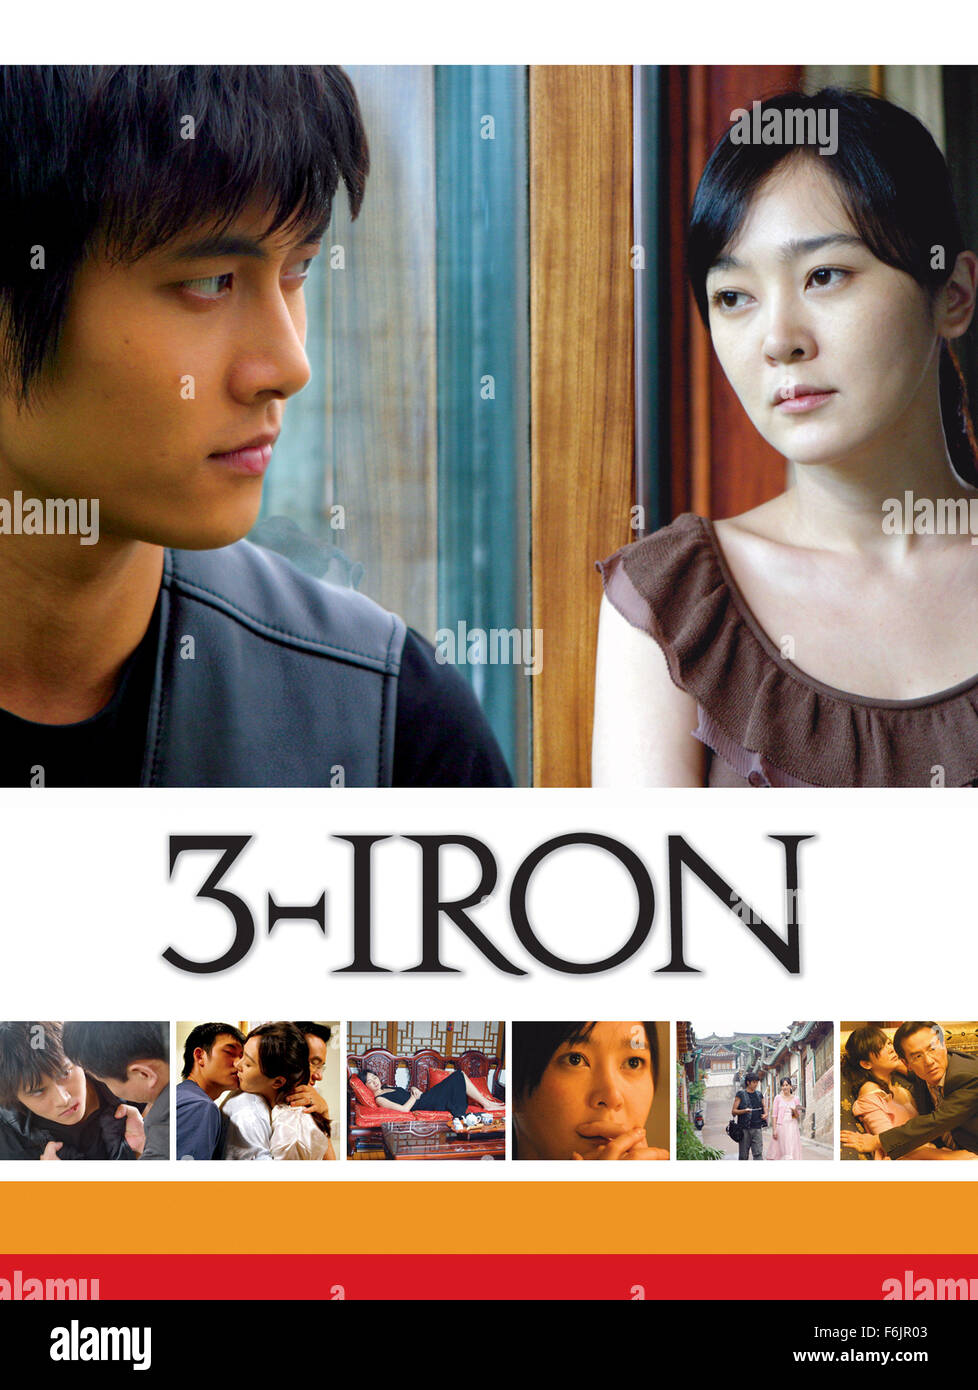 RELEASE DATE: April 29, 2005. MOVIE TITLE: 3-Iron. STUDIO: Cineclick Asia. PLOT: A young drifter enters strangers' houses - and lives - while owners are away. He spends a night or a day squatting in, repaying their unwitting hospitality by doing laundry or small repairs. His life changes when he runs into a beautiful woman in an affluent mansion who is ready to escape her unhappy, abusive marriage. PICTURED: HEE JAE as Tae-suk and SEUNG-YEON LEE as Sun-hwa. Stock Photo